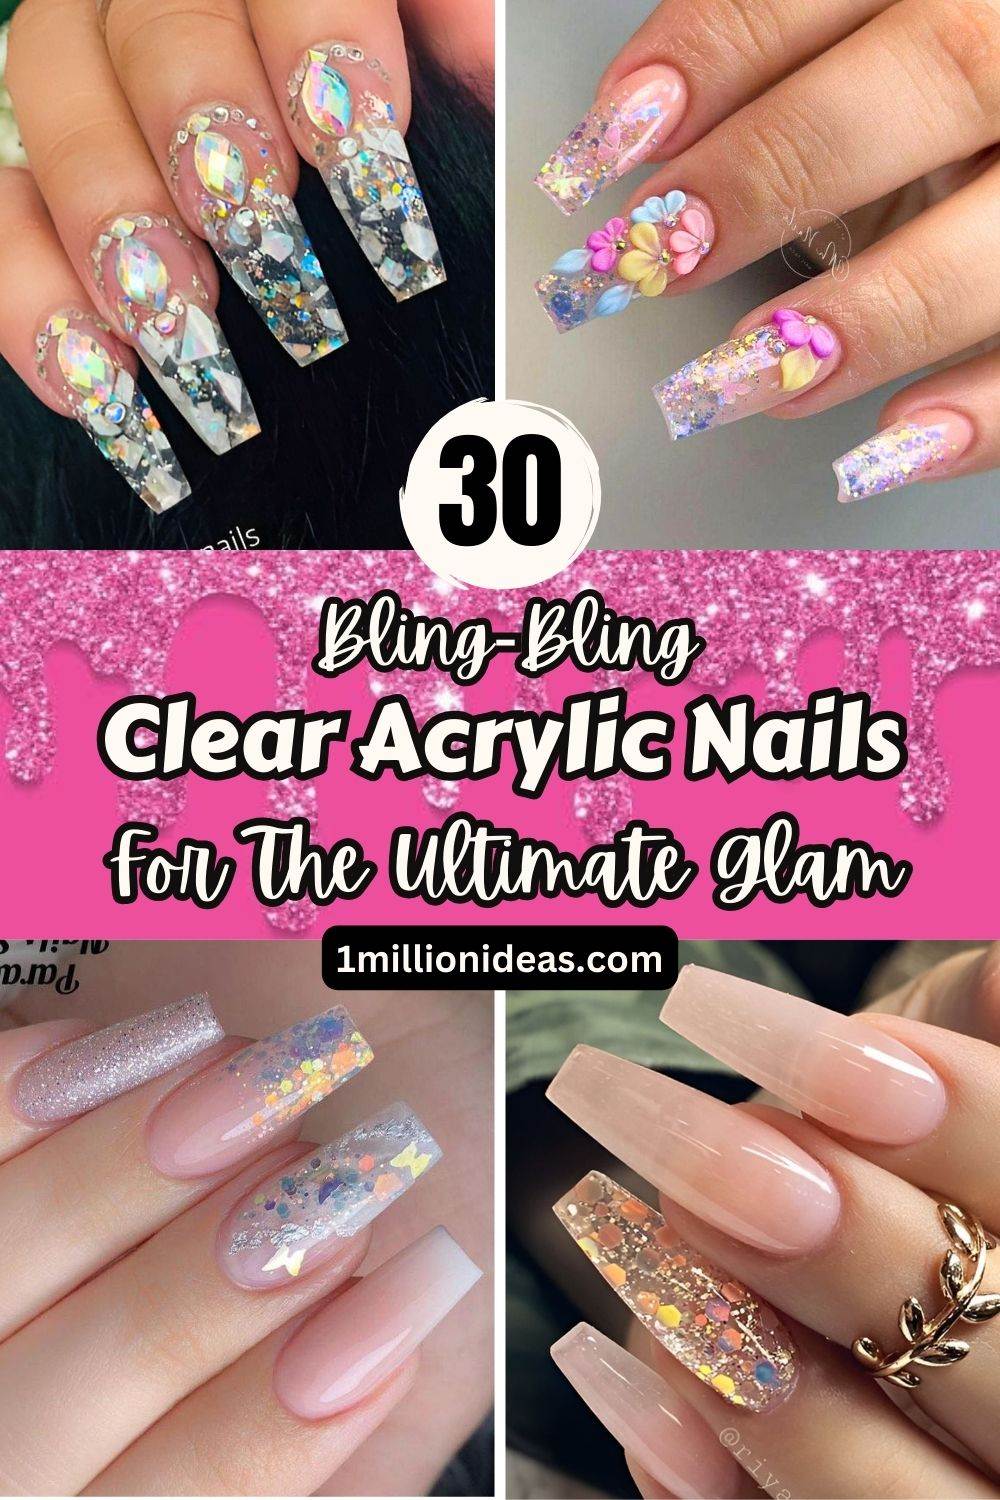 30 Bling-Bling Clear Acrylic Nails For The Ultimate Feminine Glam - 191